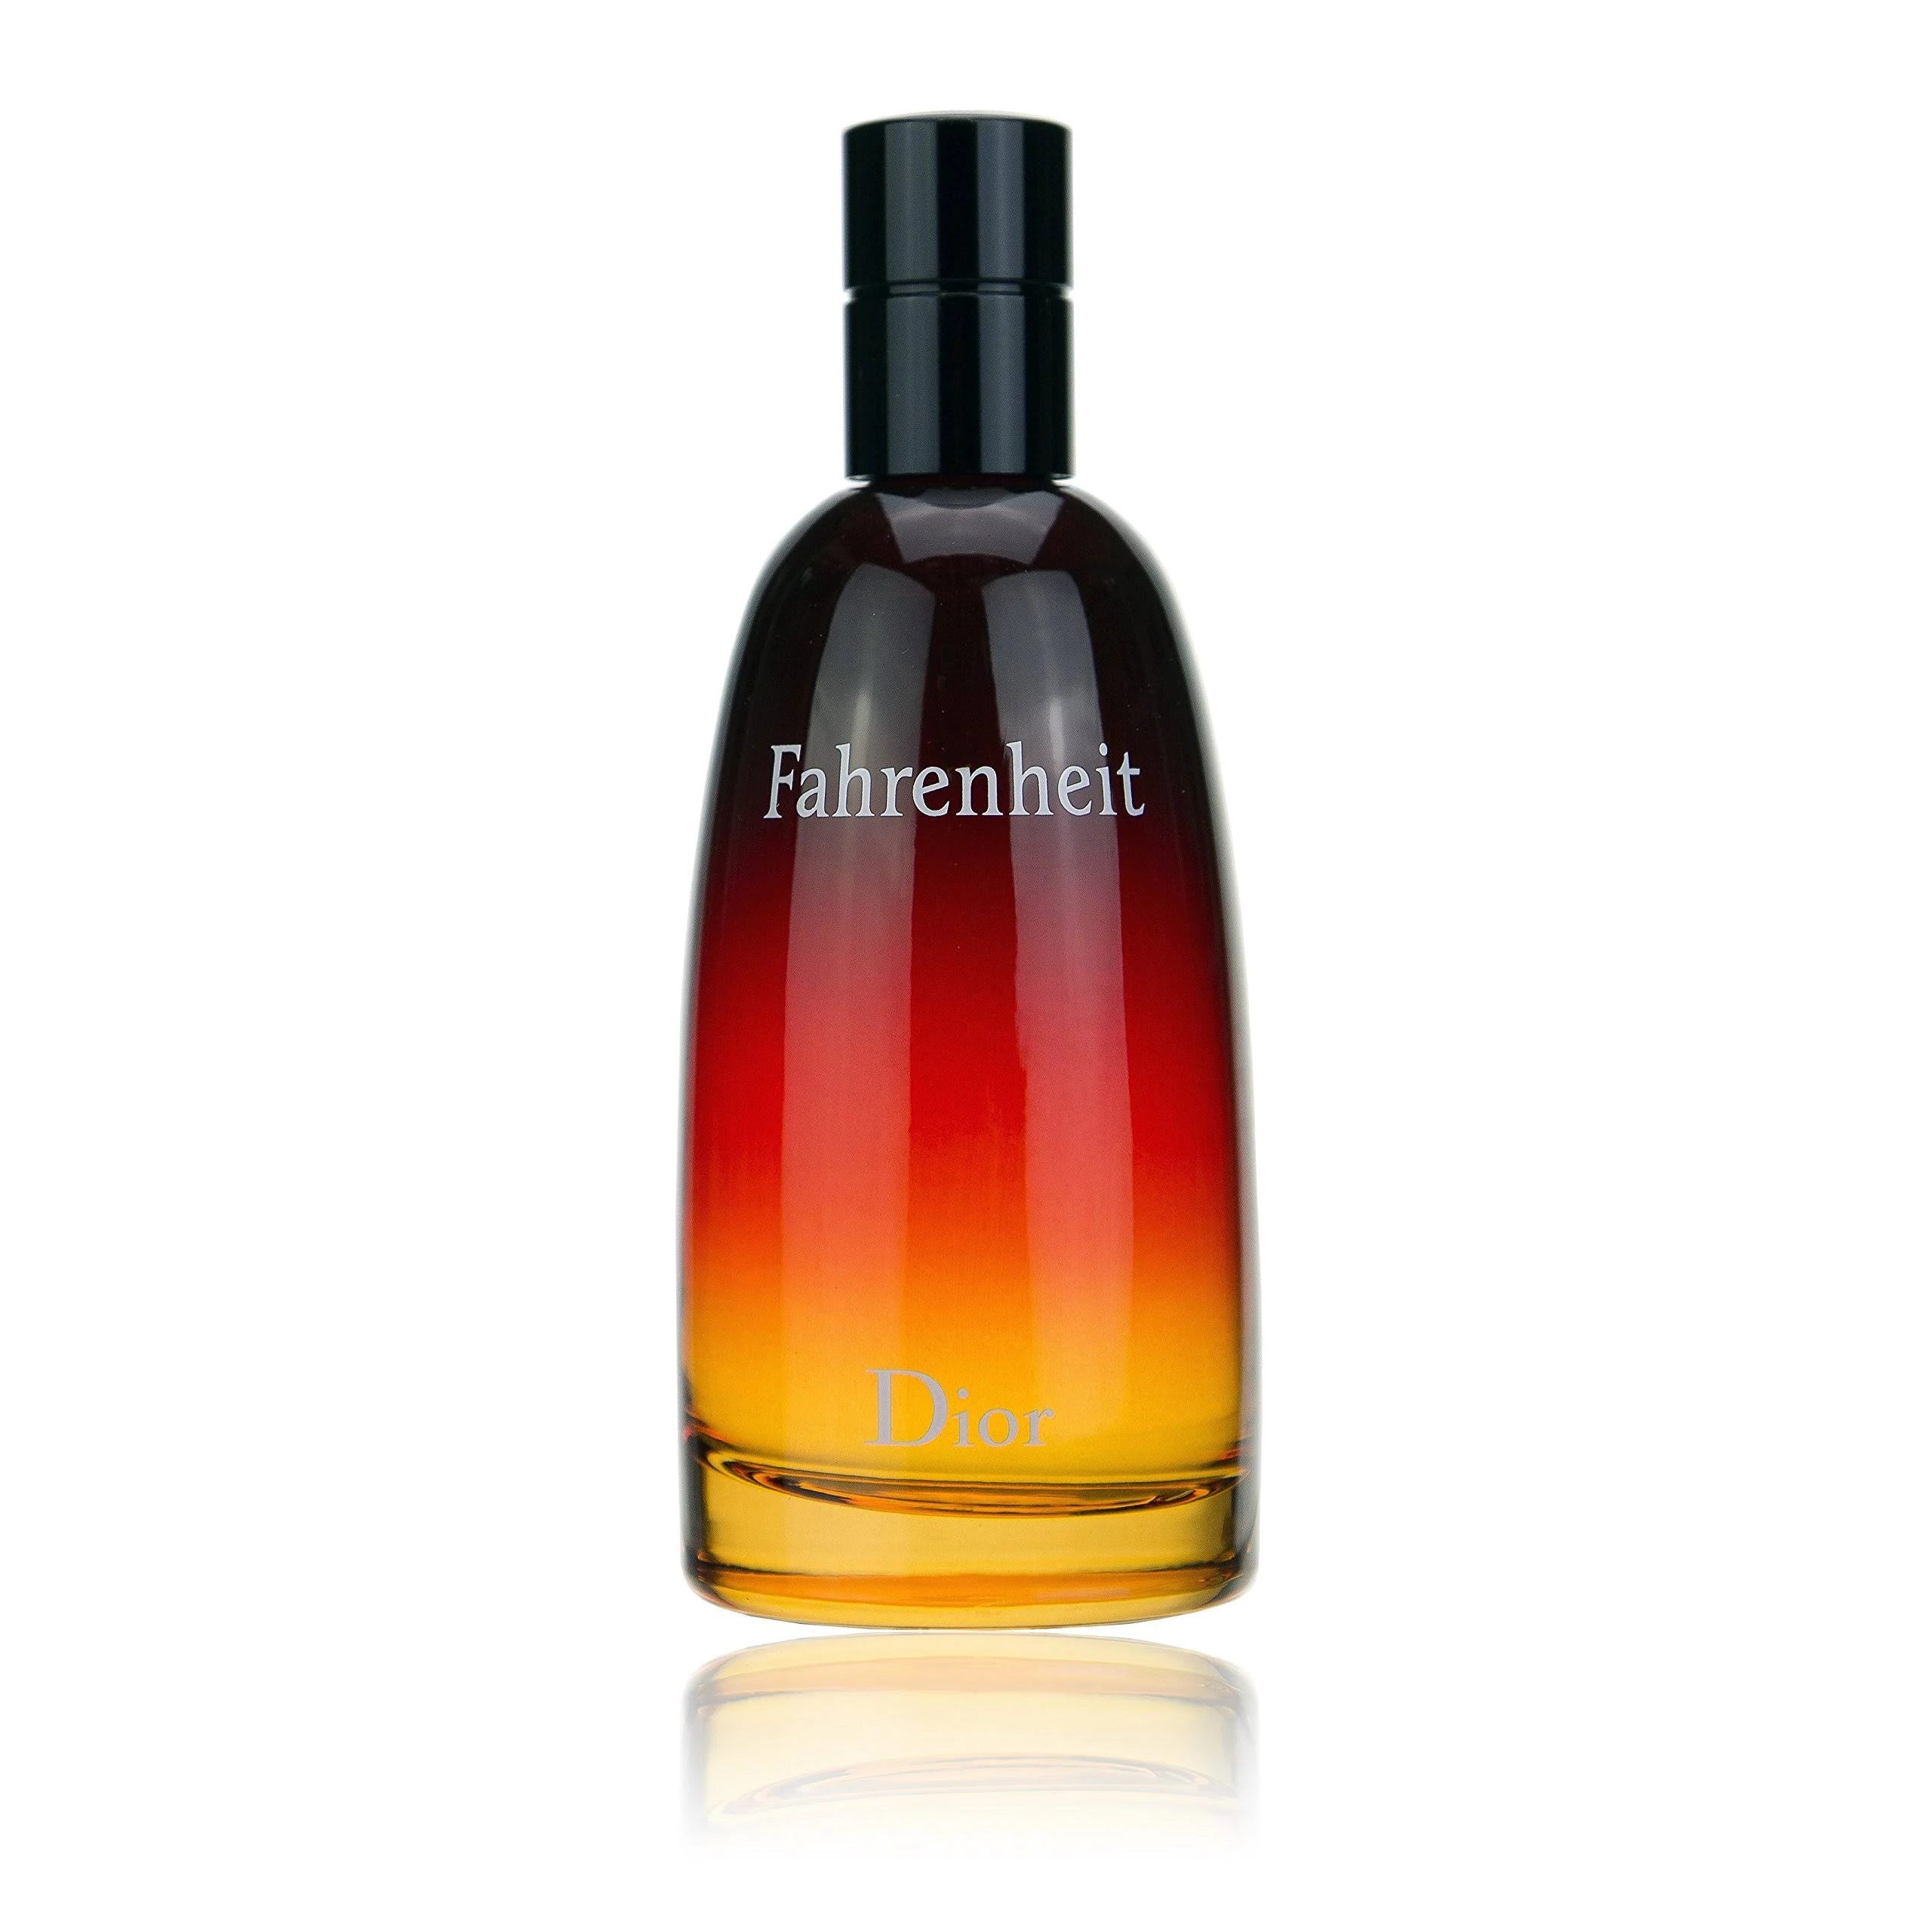 Luxurious Fahrenheit Cologne by Christian Dior, Woody Fragrance for Men | Image